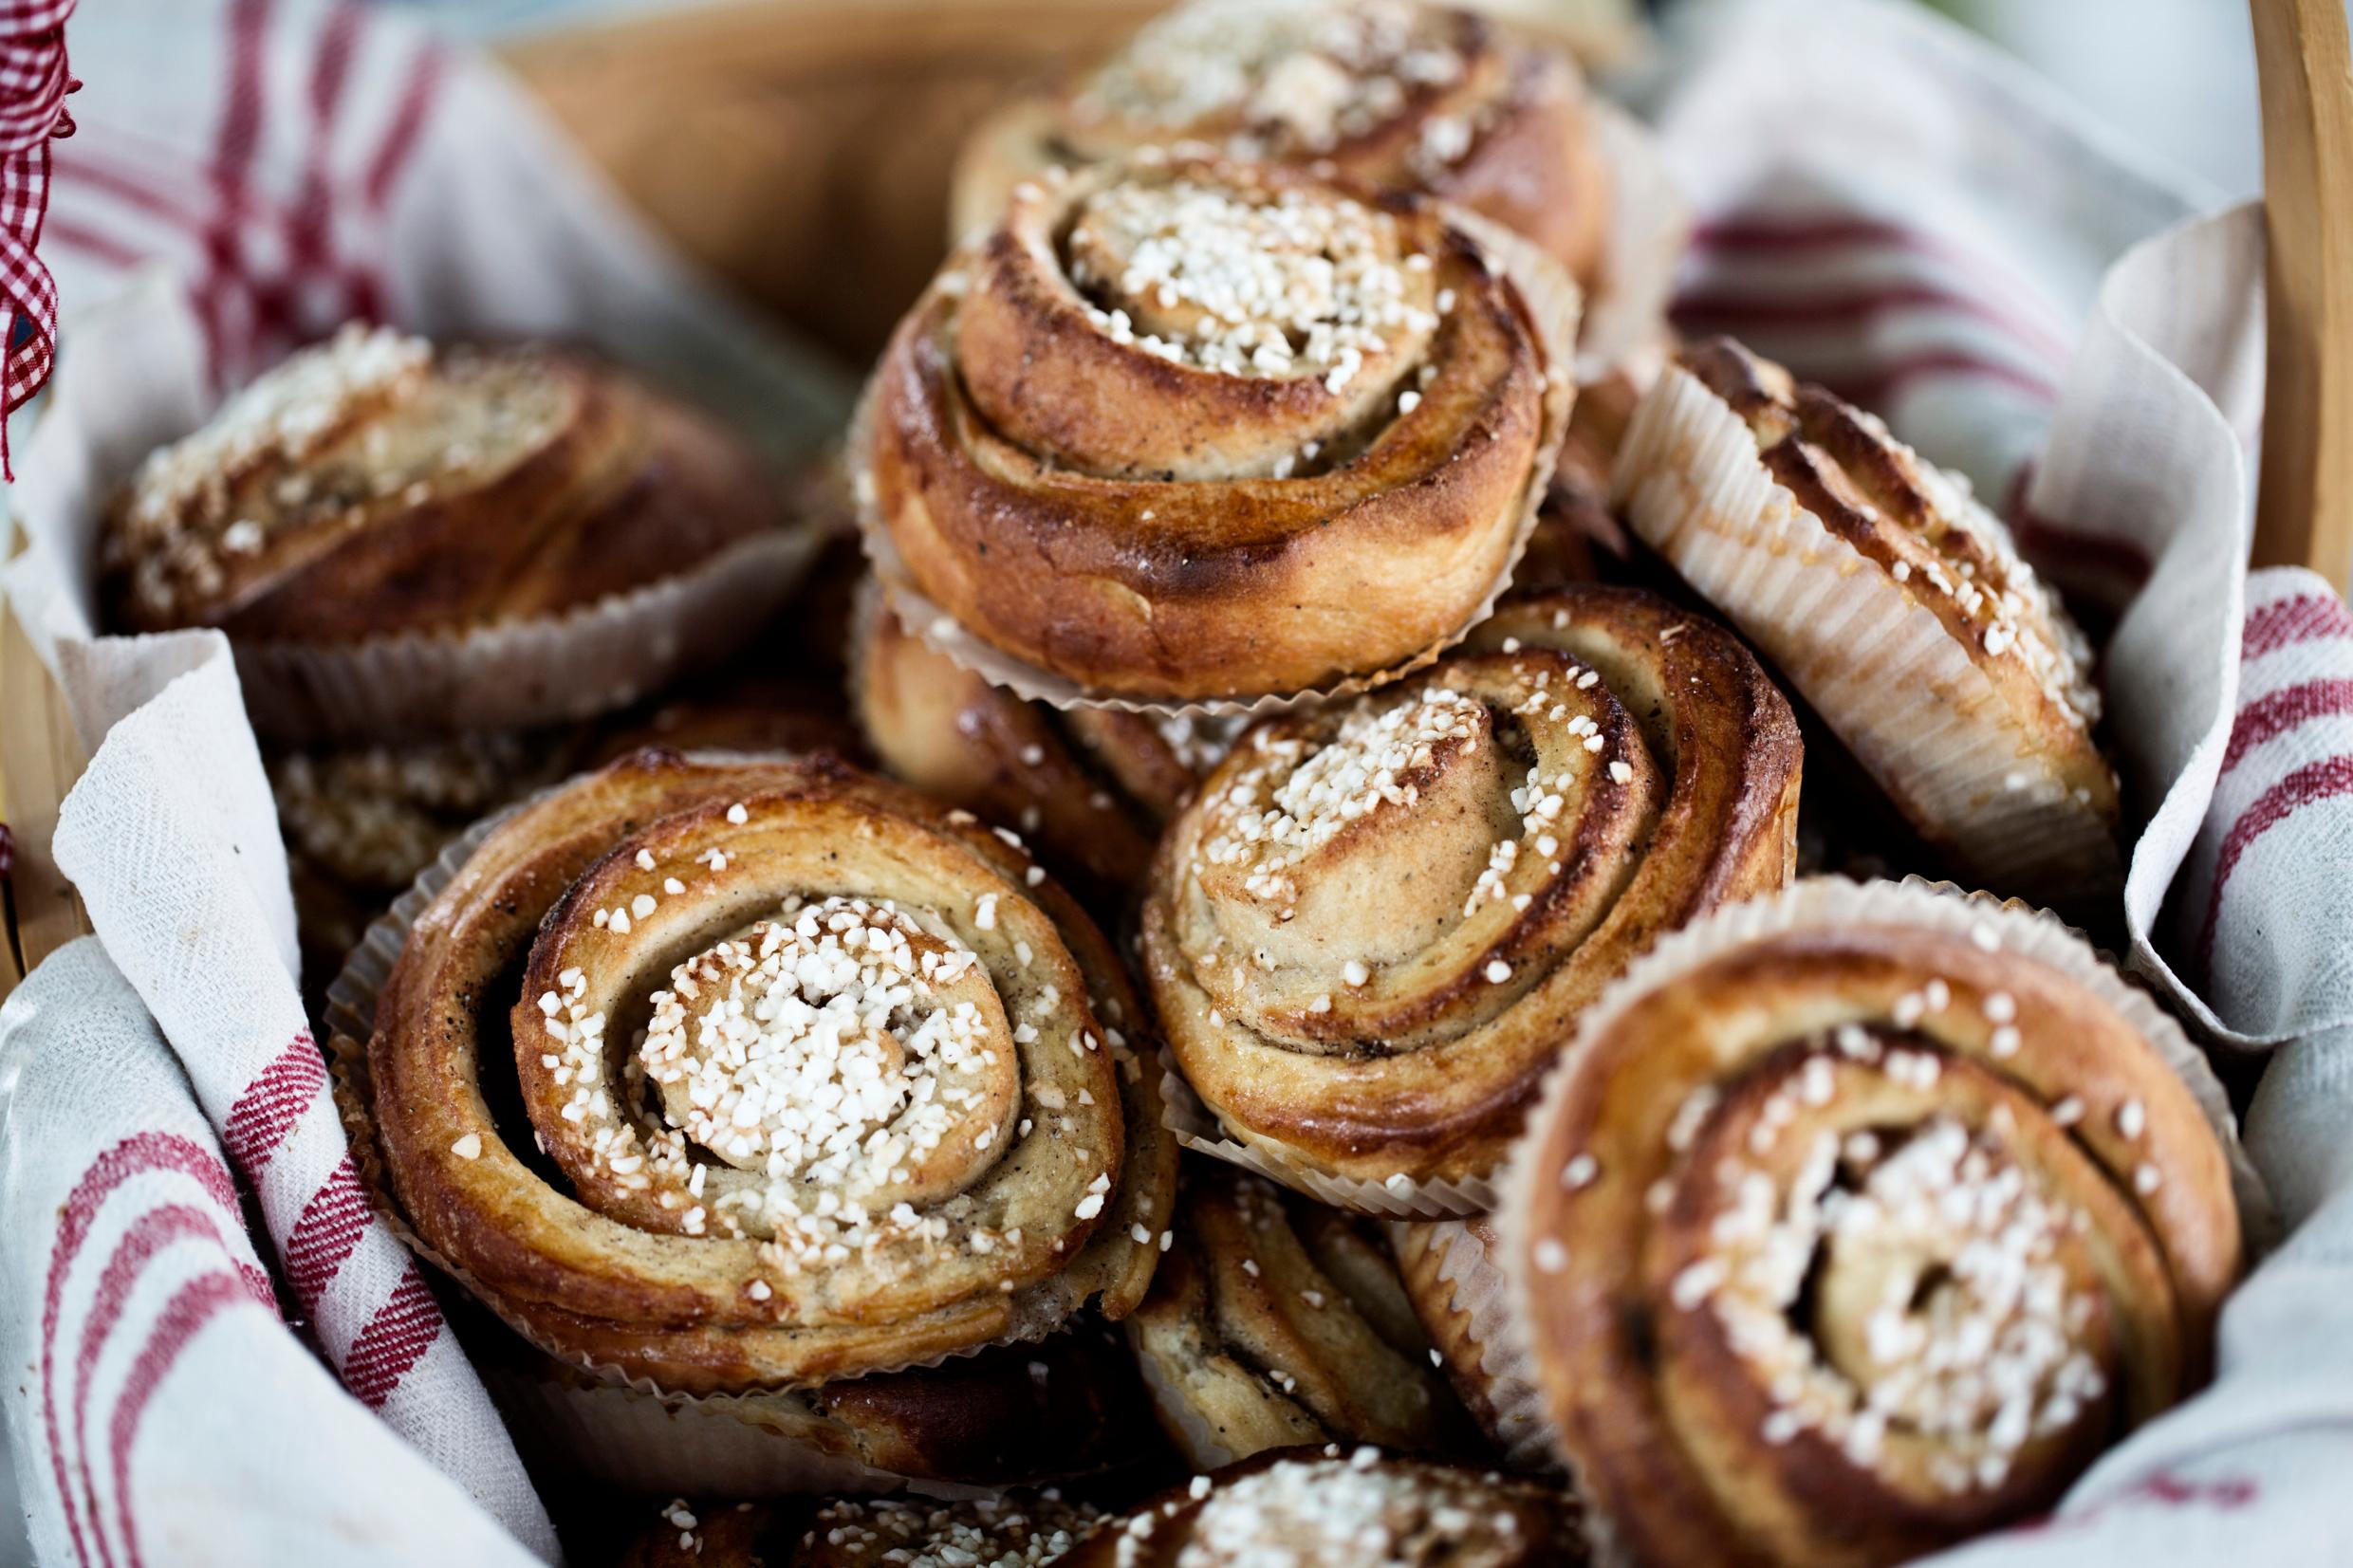 A basket filled with cinnamon buns.